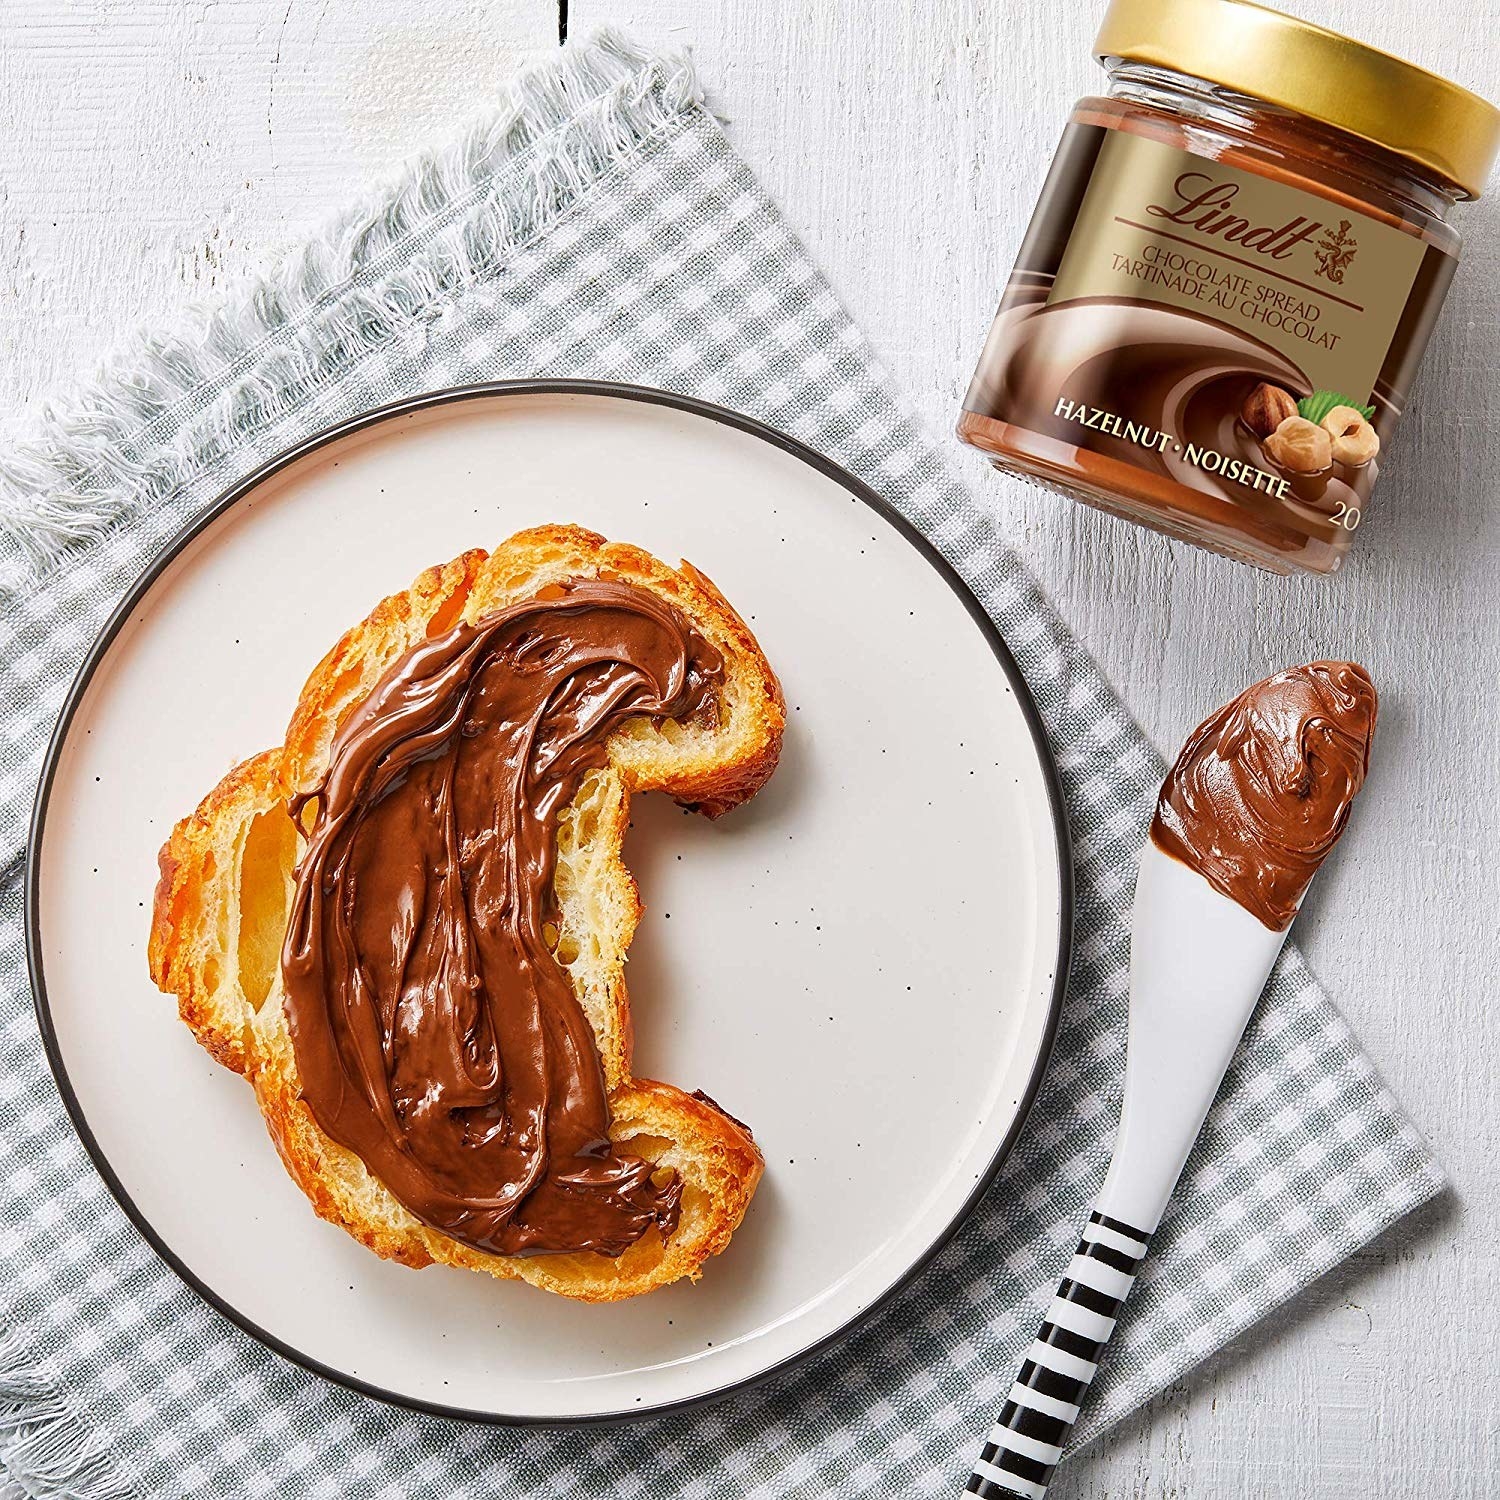 The jar of spread next to a croissant